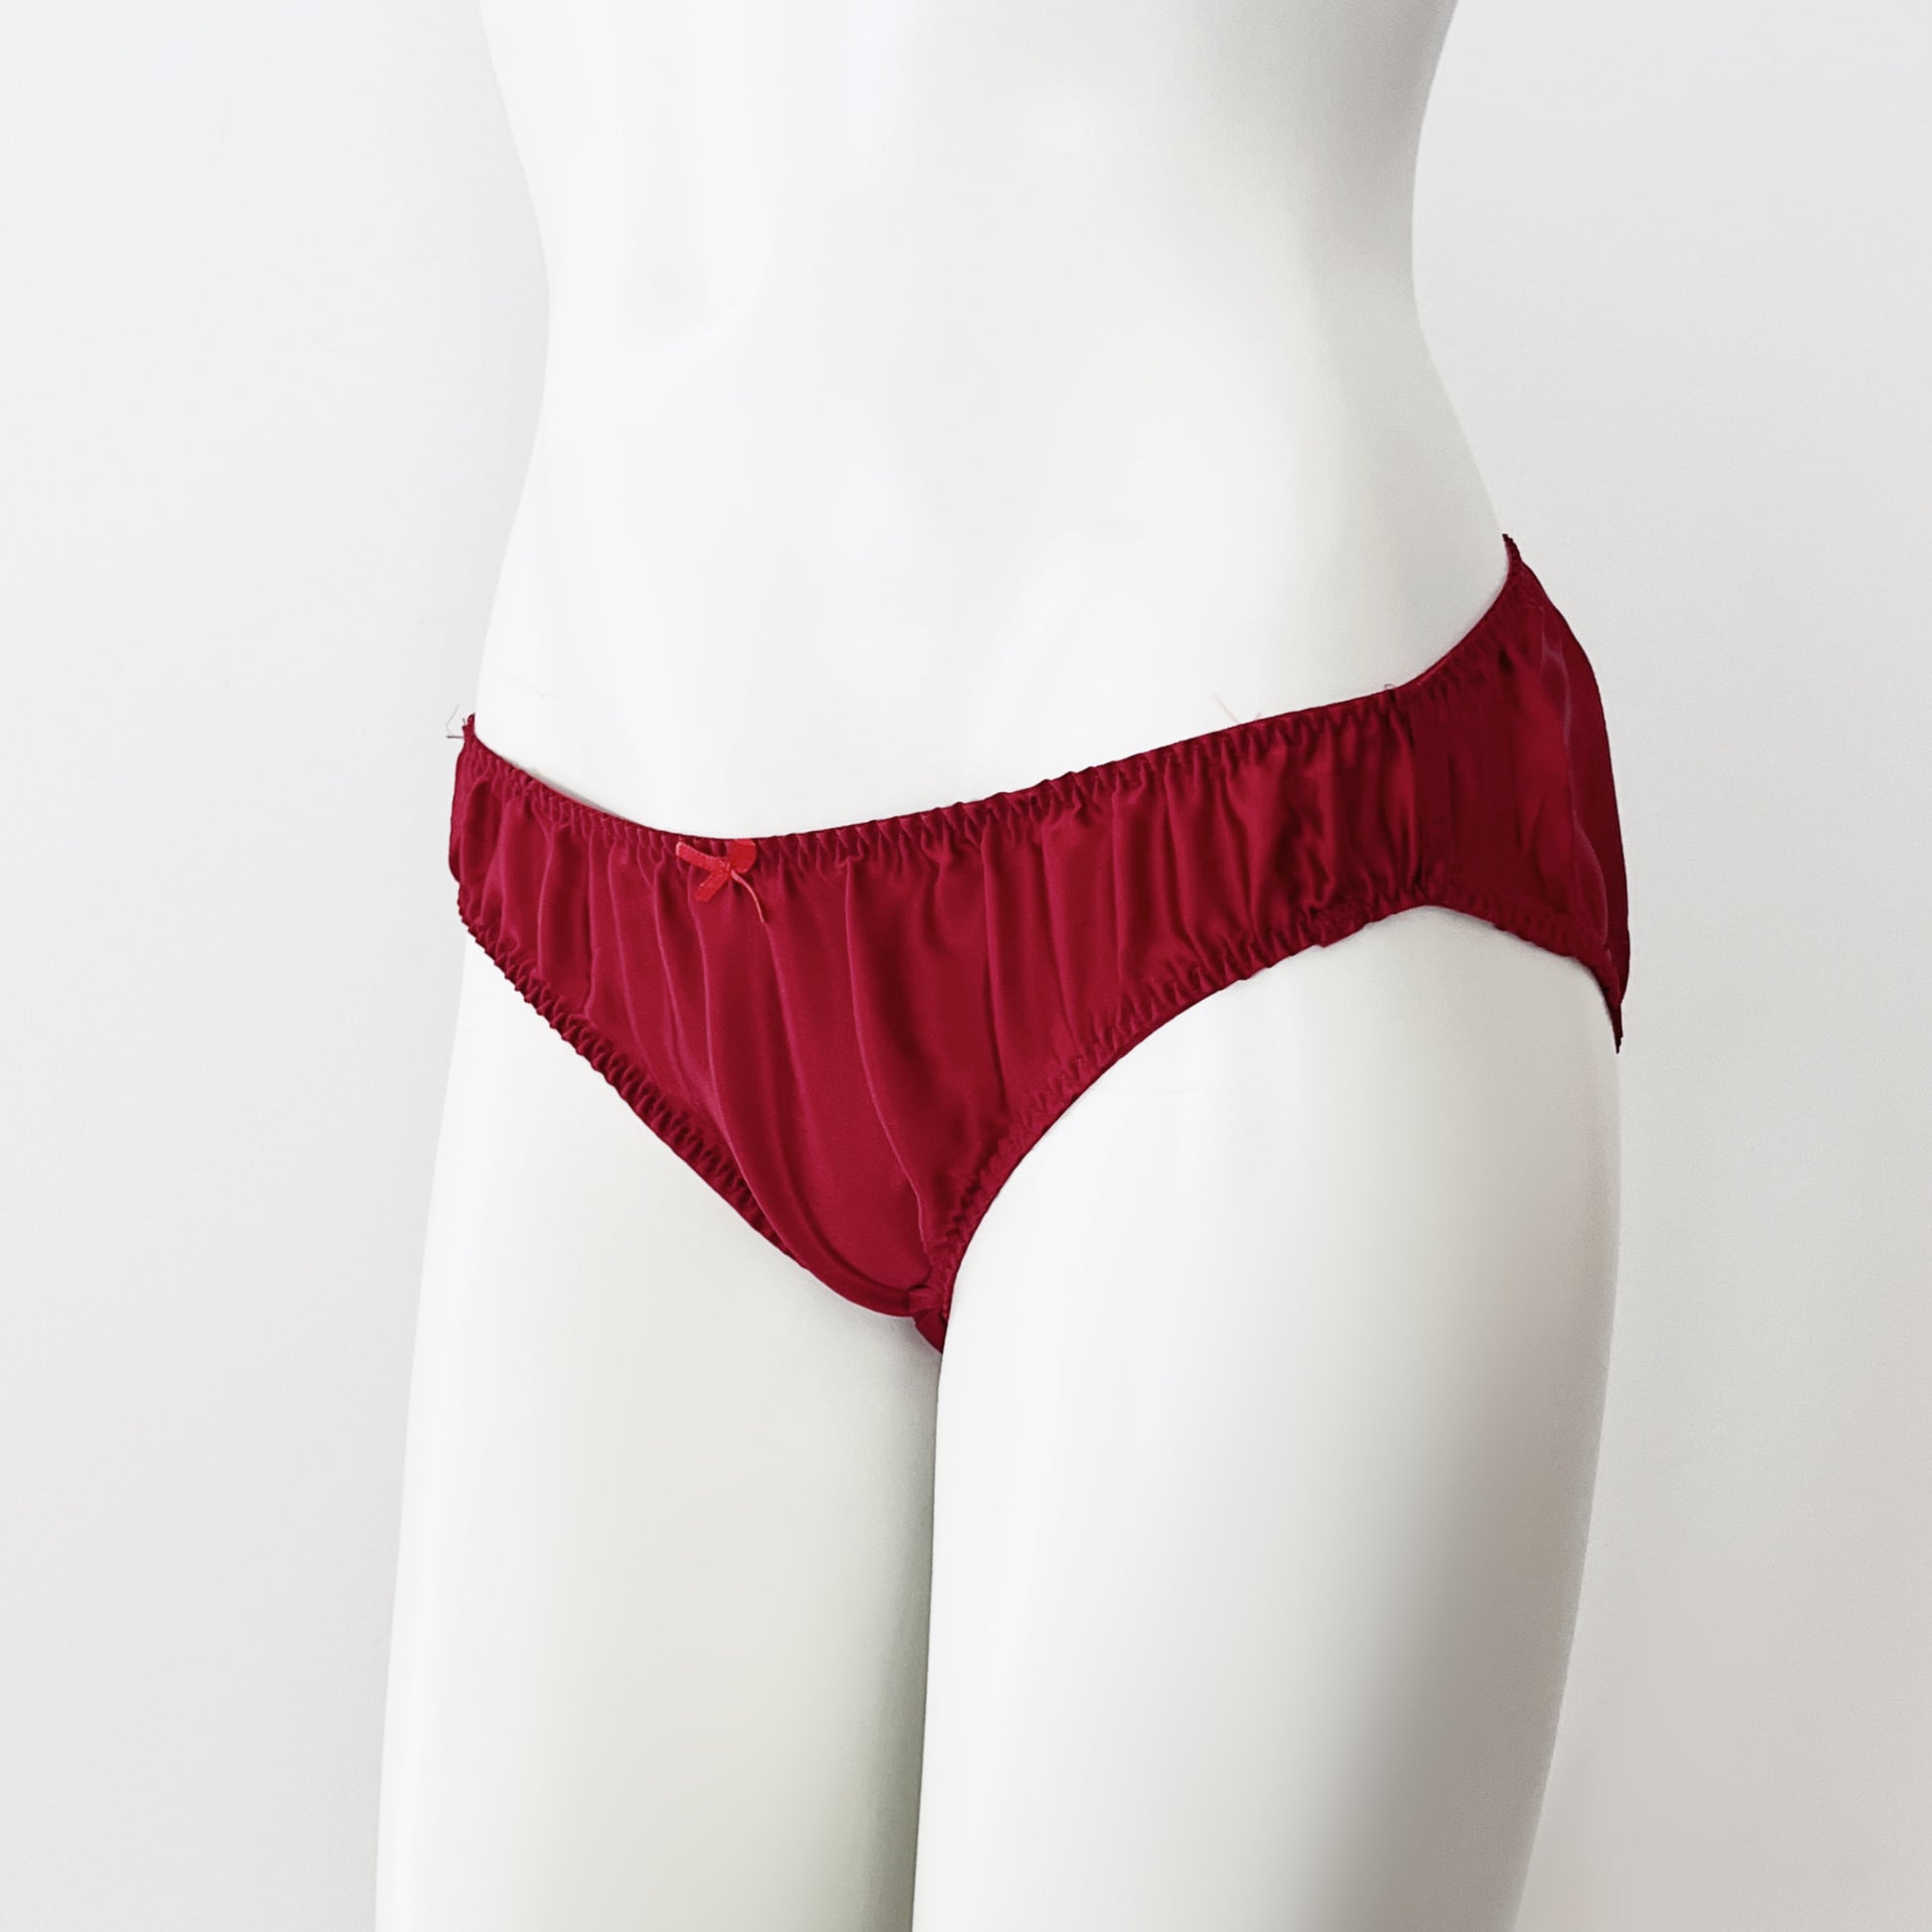 Red Thongs & Briefs for Women